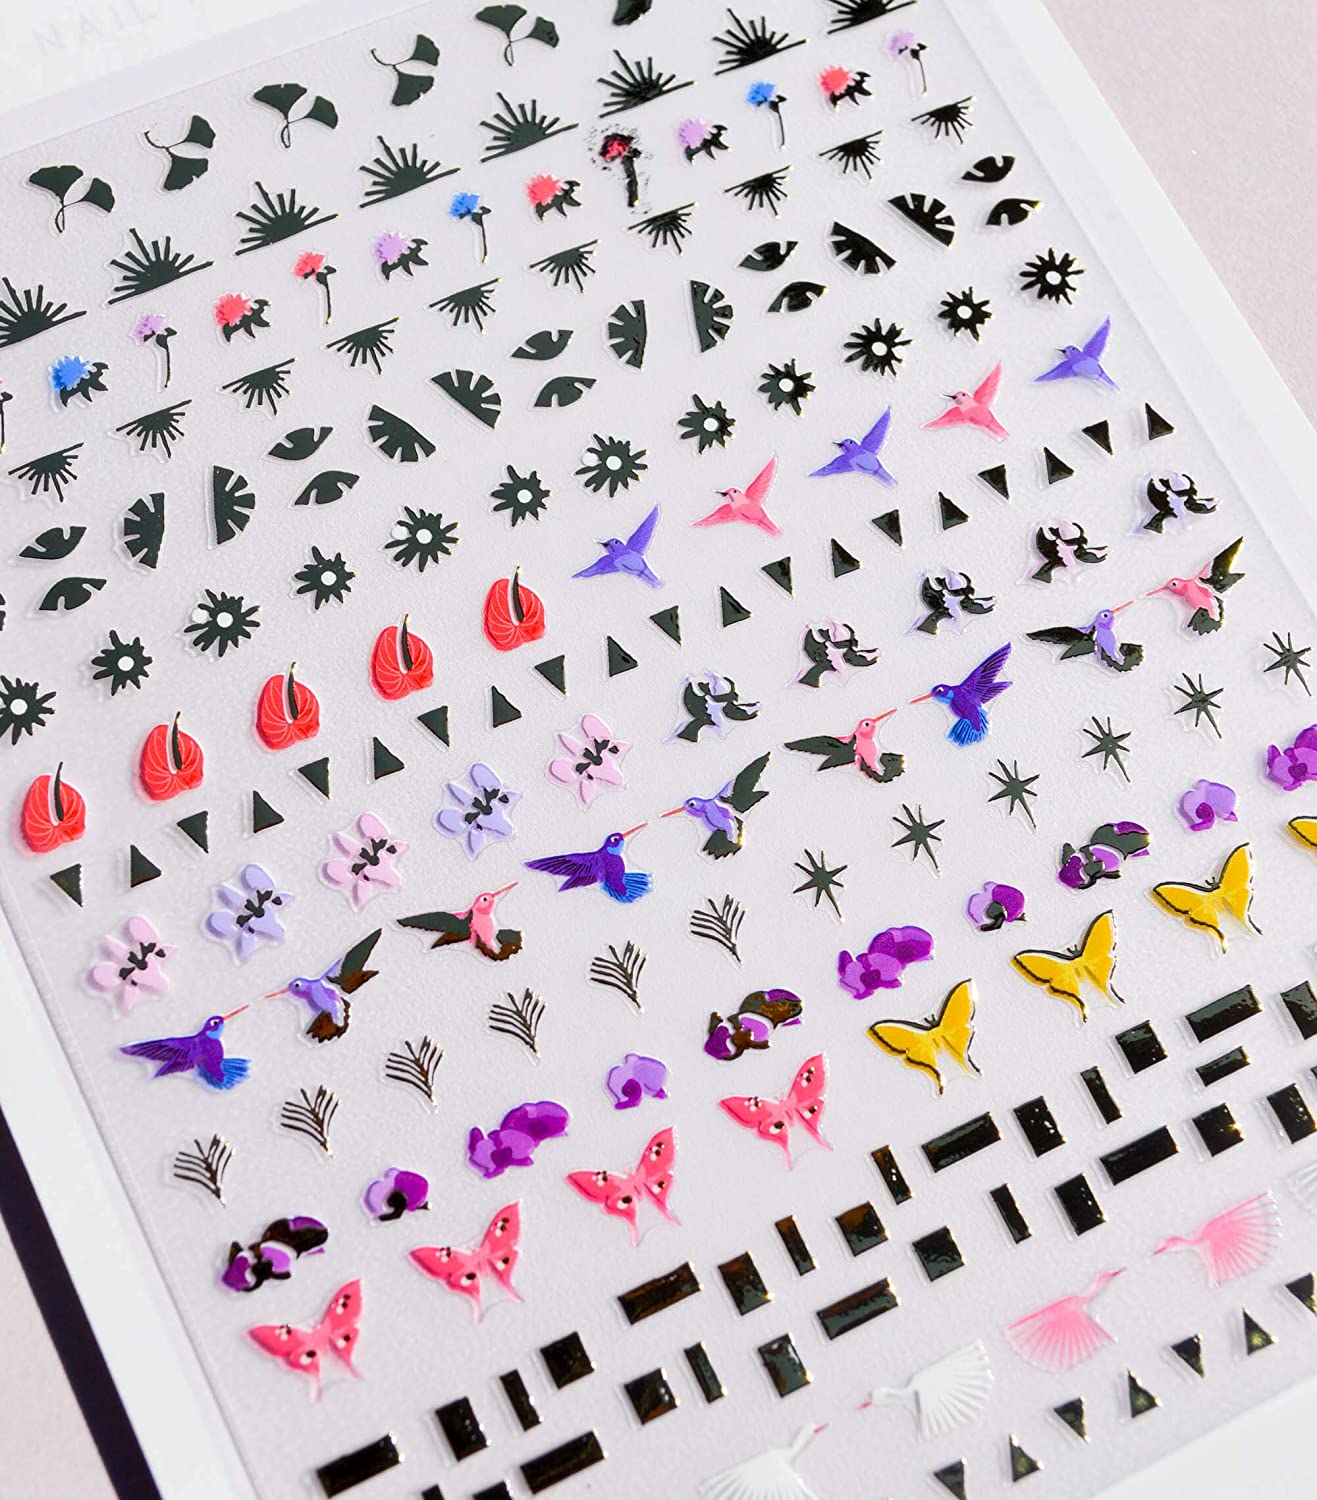 Closeup of Deco Miami Nail Art Stickers pack shows butterfly, floral, and bird designs